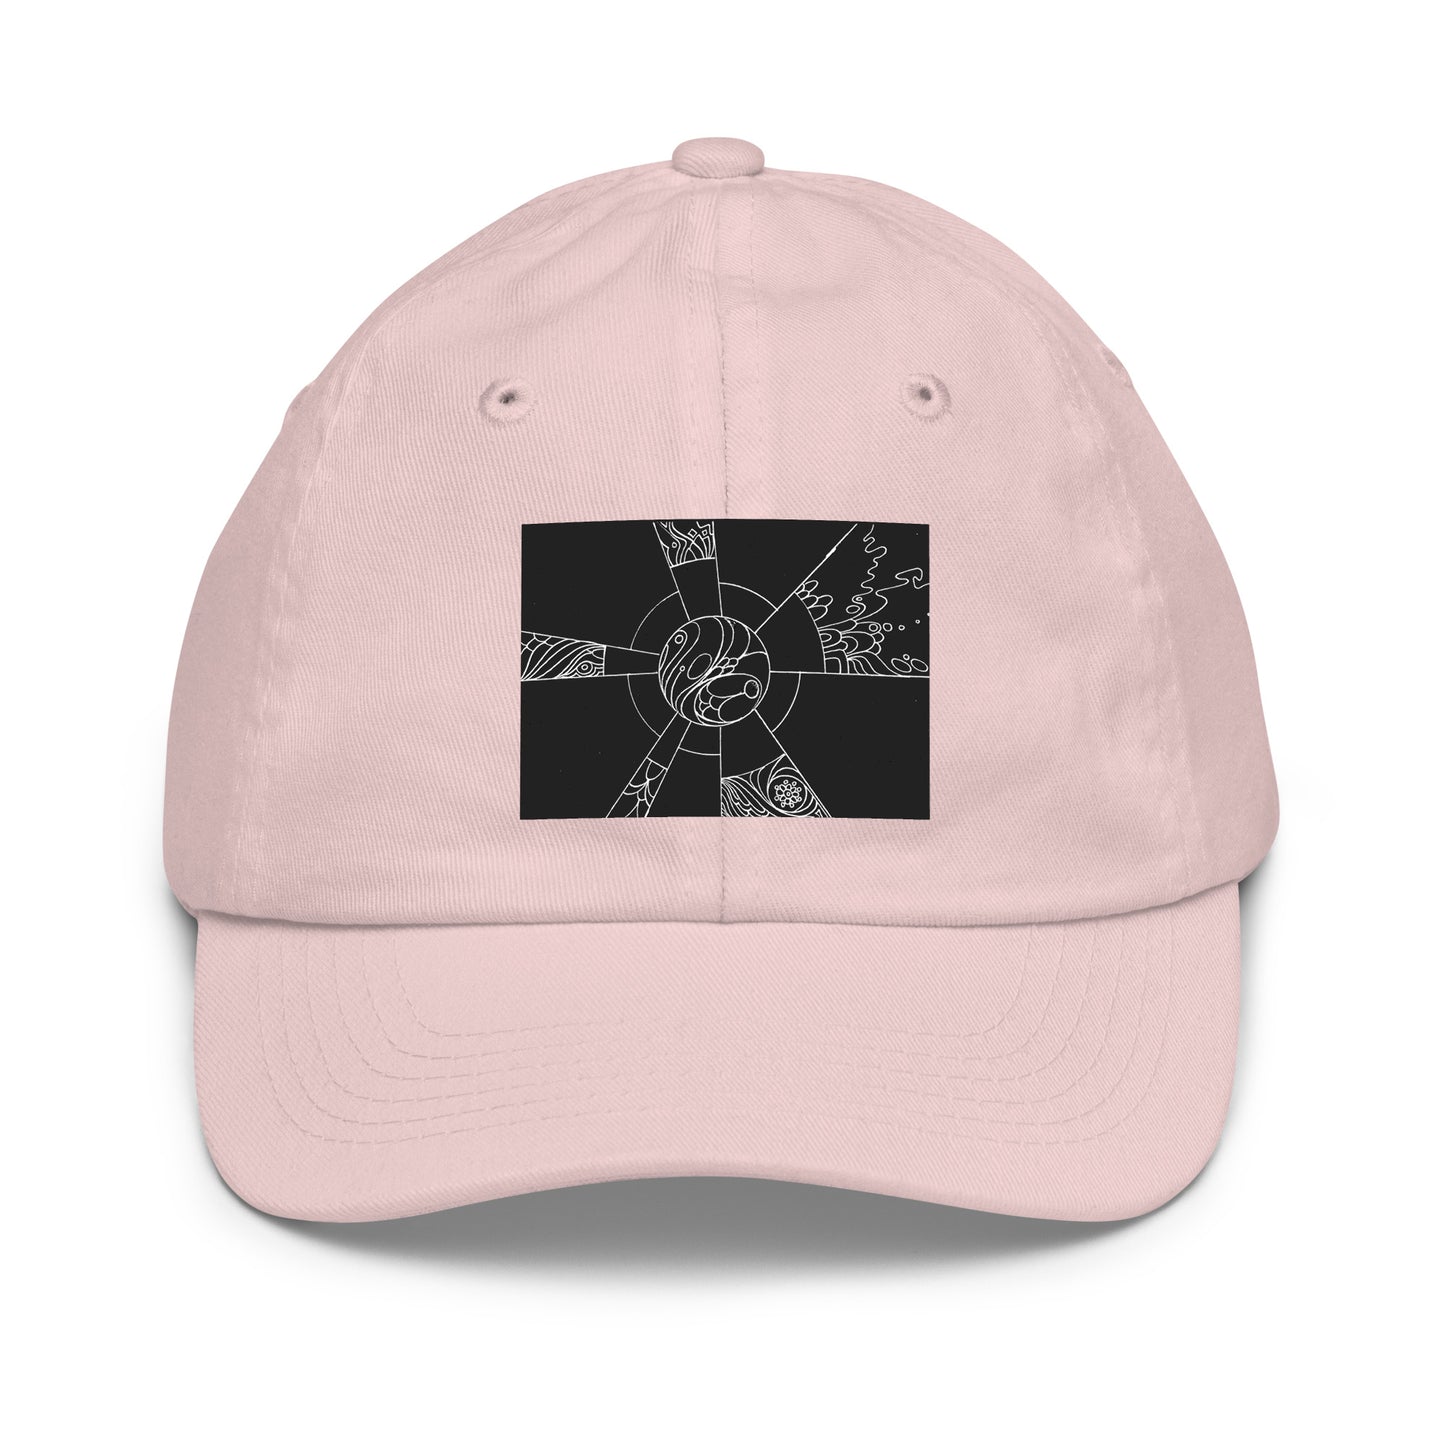 5 Thought Entropy Youth baseball cap